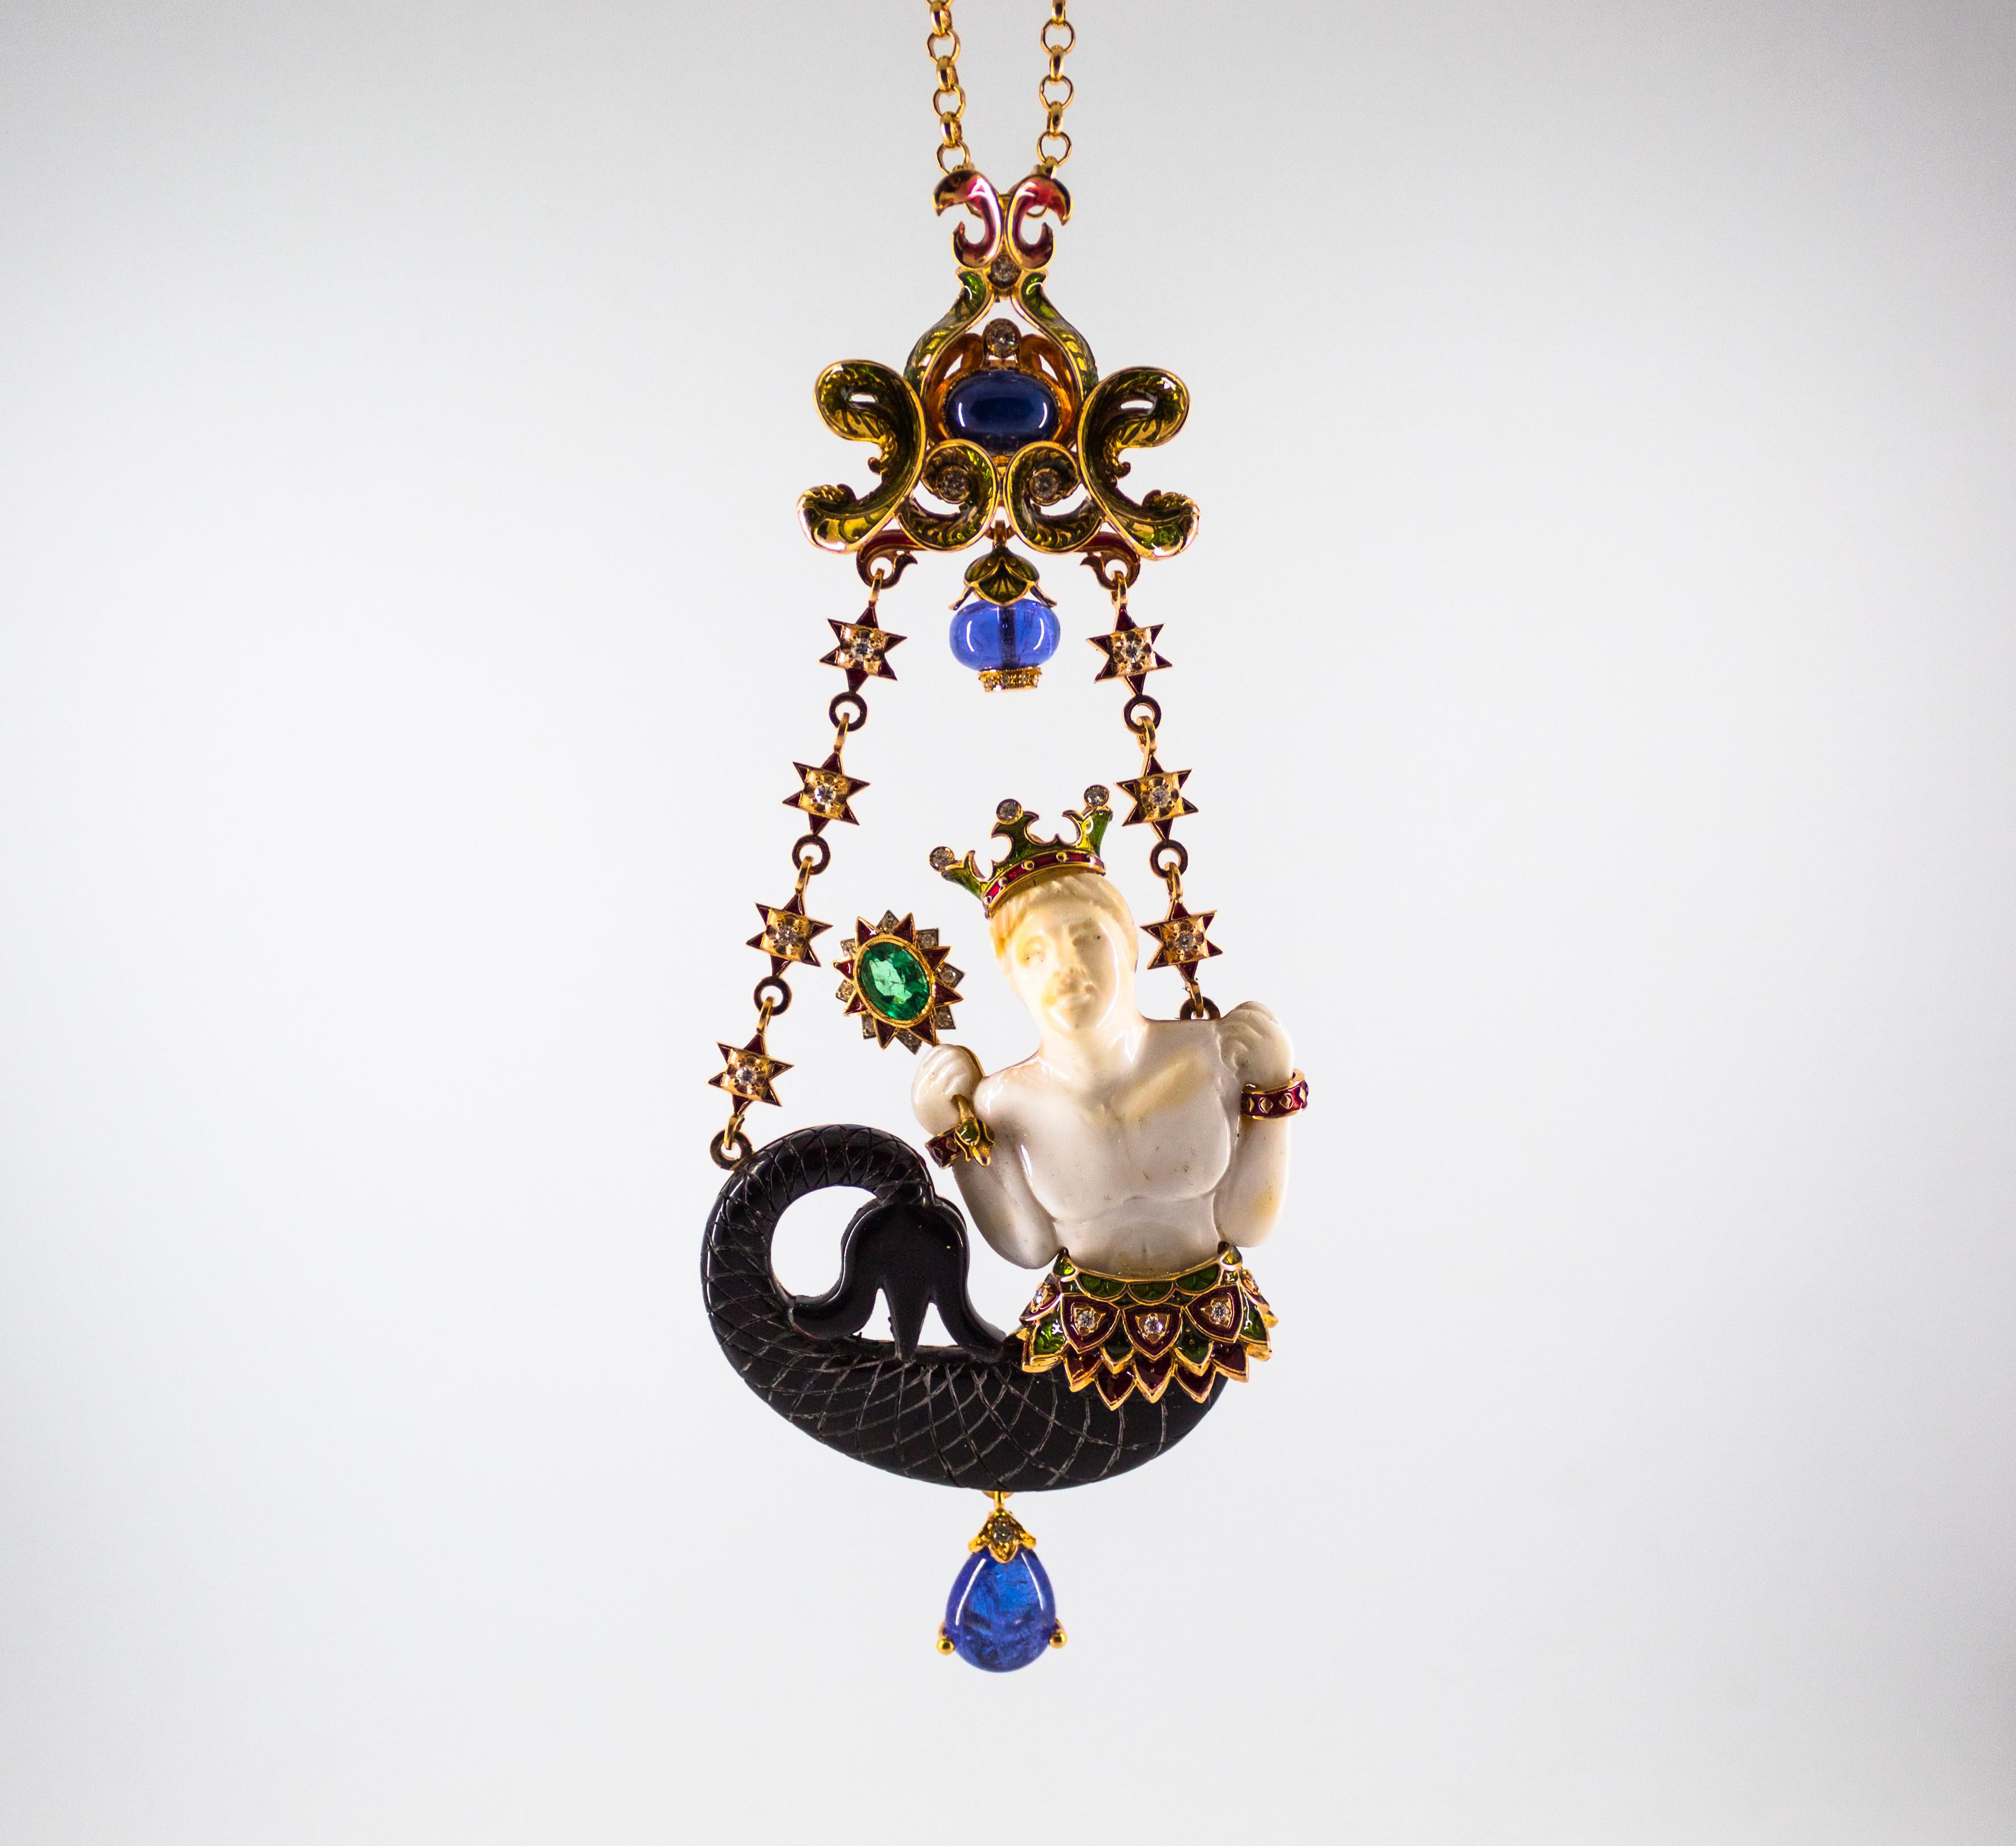 This Necklace is made of 14K Yellow Gold.
This Necklace has 1.00 Carats of White Diamonds.
This Necklace has a 3.21 Carats Blue Sapphire.
This Necklace has a 0.82 Carats Emerald.
This Necklace has 29.50 Carats of Tanzanite.
This Necklace has Enamel,